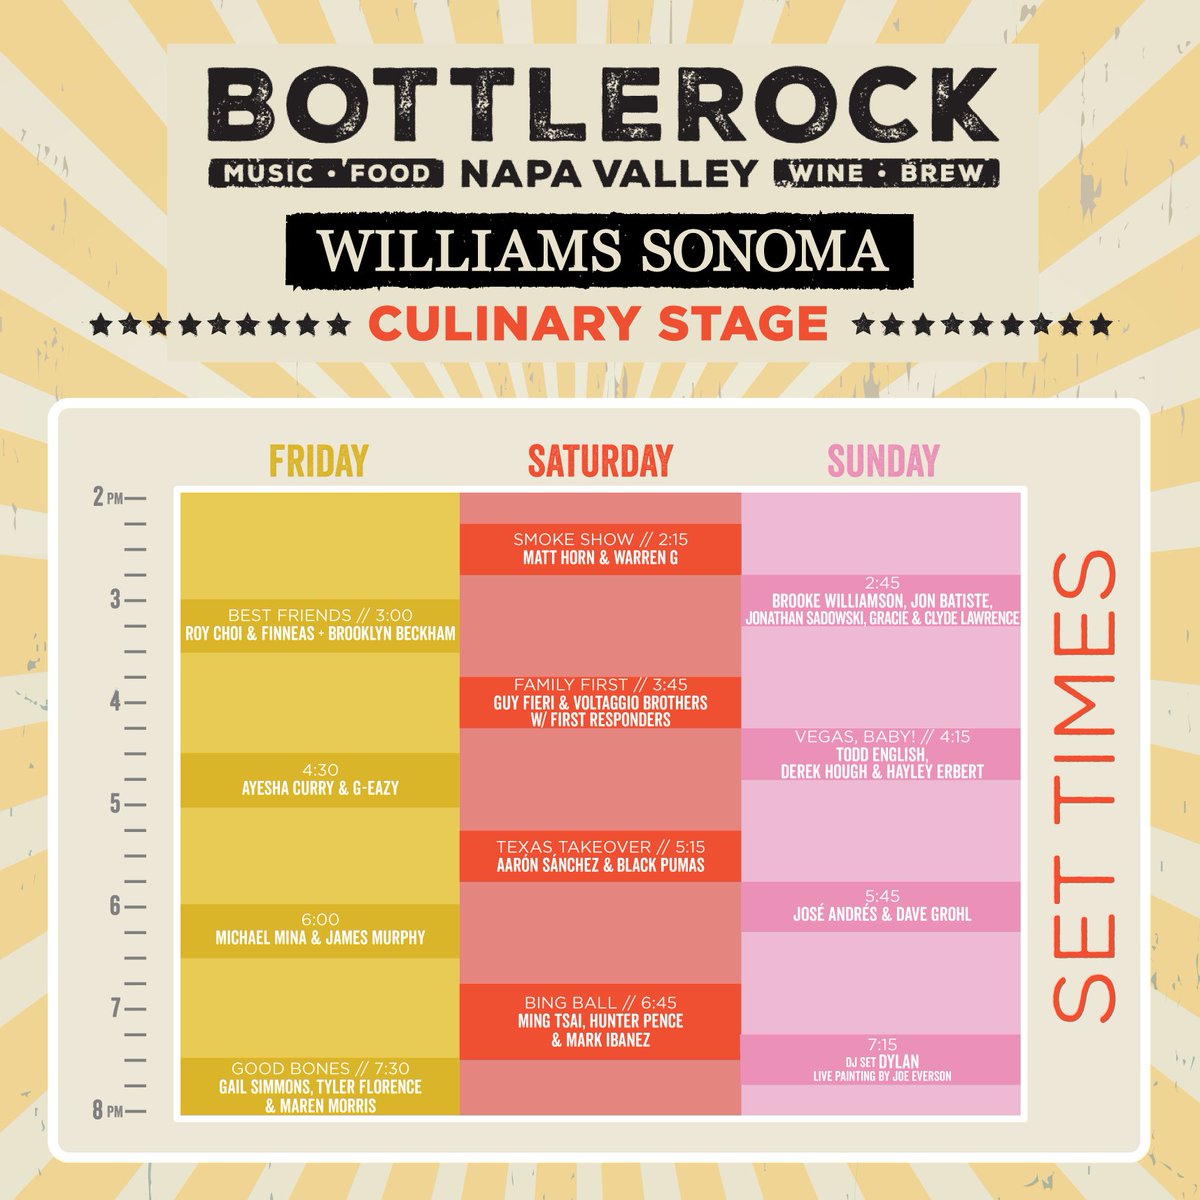 Hope you saved room for 🙌 MORE 🙌 Add these must-see @WilliamsSonoma Culinary Sets to your schedule on the official BottleRock app 📱 💕 👨‍🍳 You never know what you'll see on this stage 😉 🎉 🎂 BottleRockers, what were your fave once-in-a-lifetime moments from year's past?